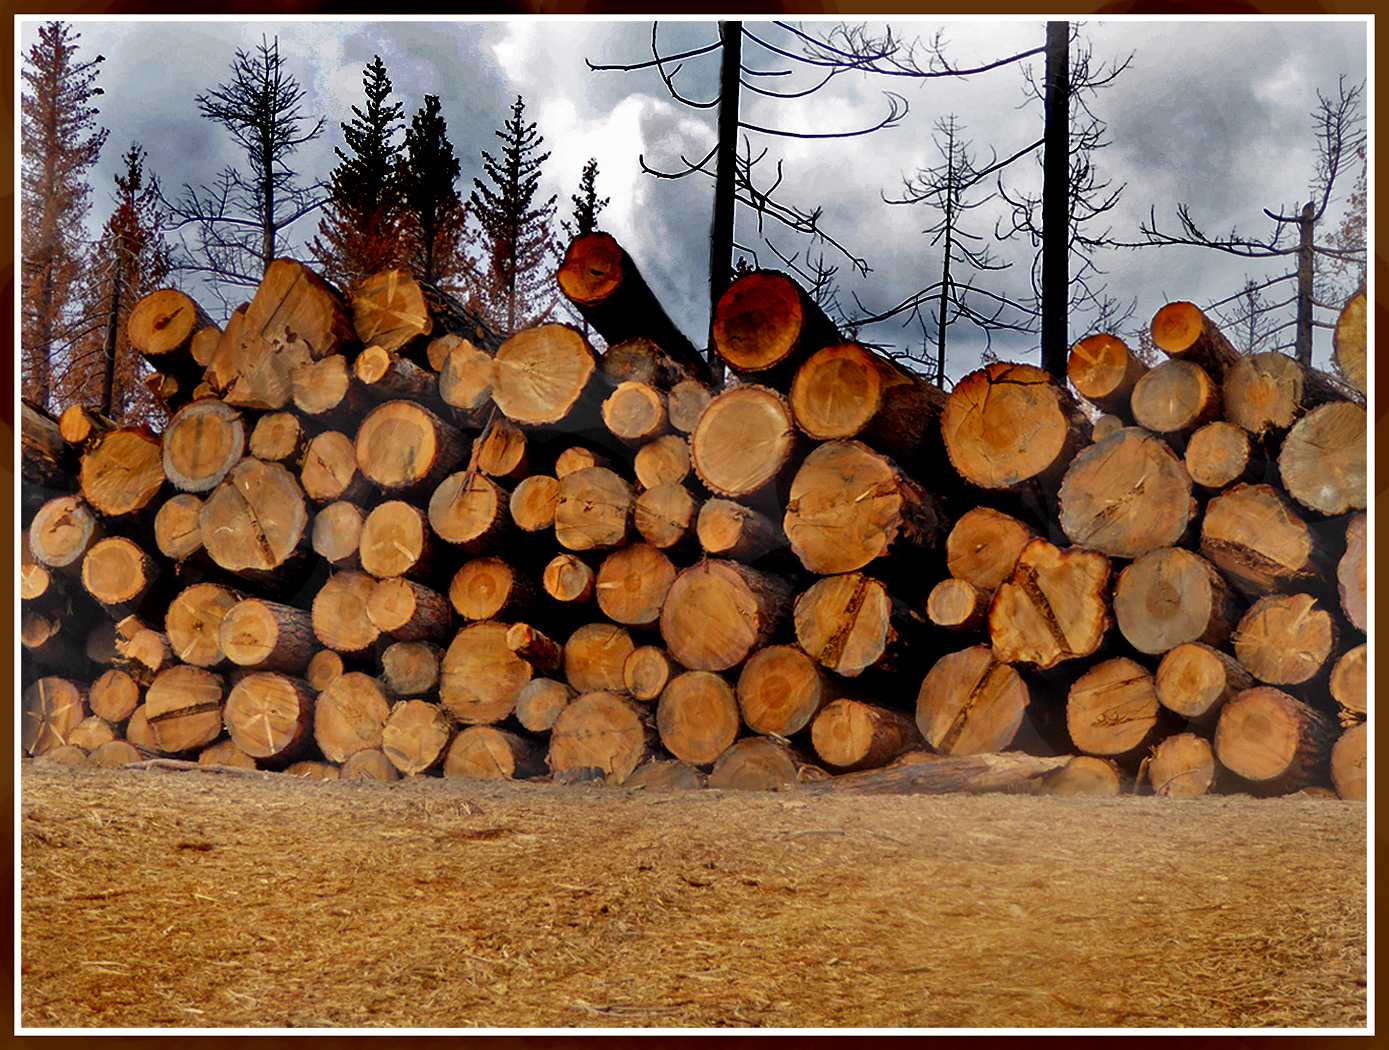 Cut logs salvaged from the Creek fire one year ago.... by Shirley Ward, FPSA, EPSA